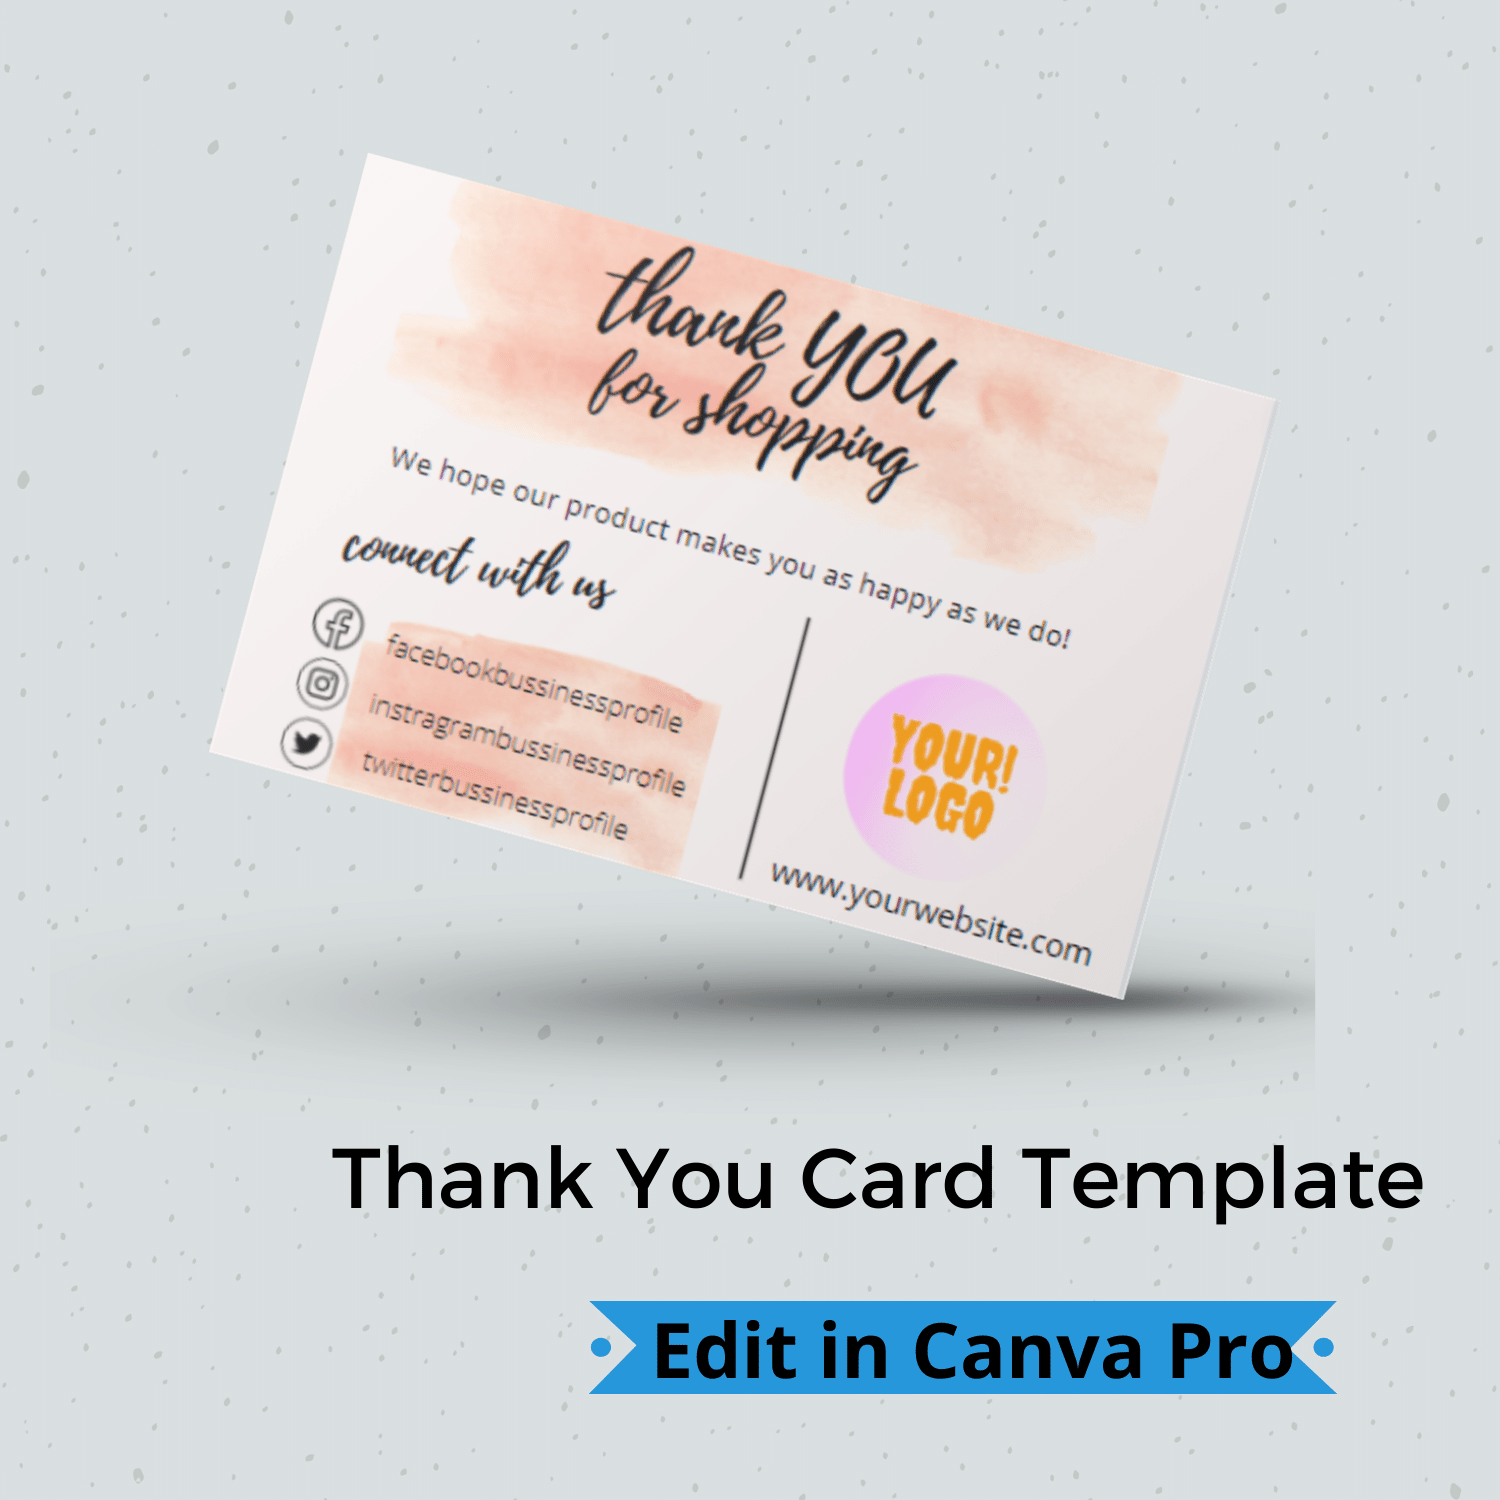 Small Business Printable Thank You Card cover image.